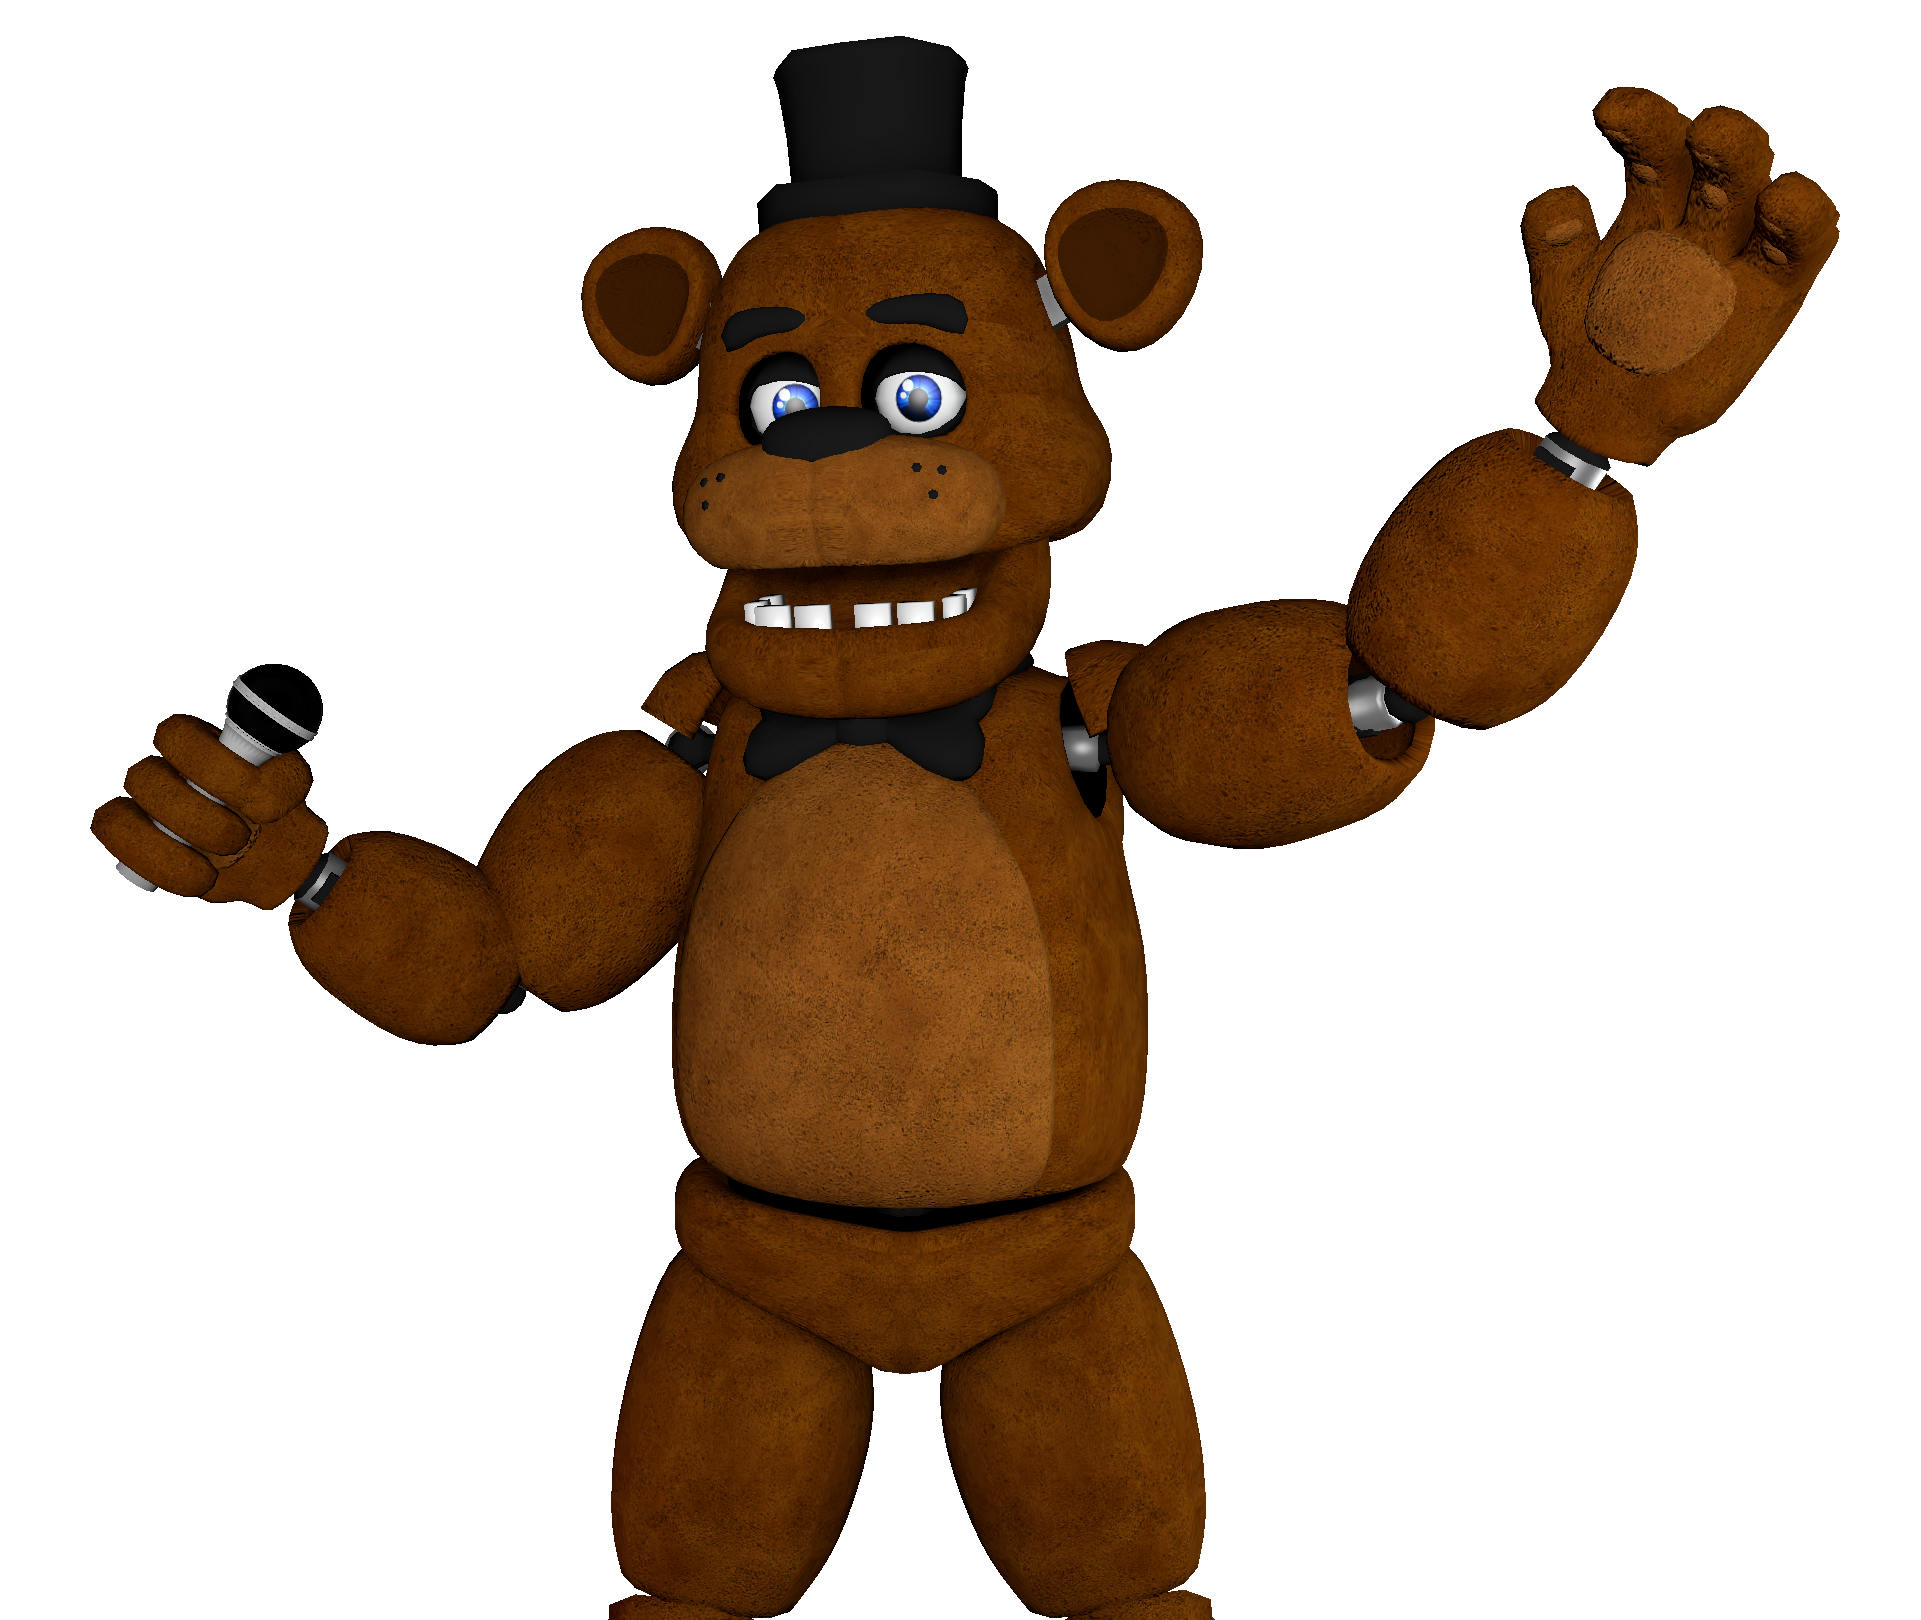 Five Nights at Freddy's - The Animatronic's by